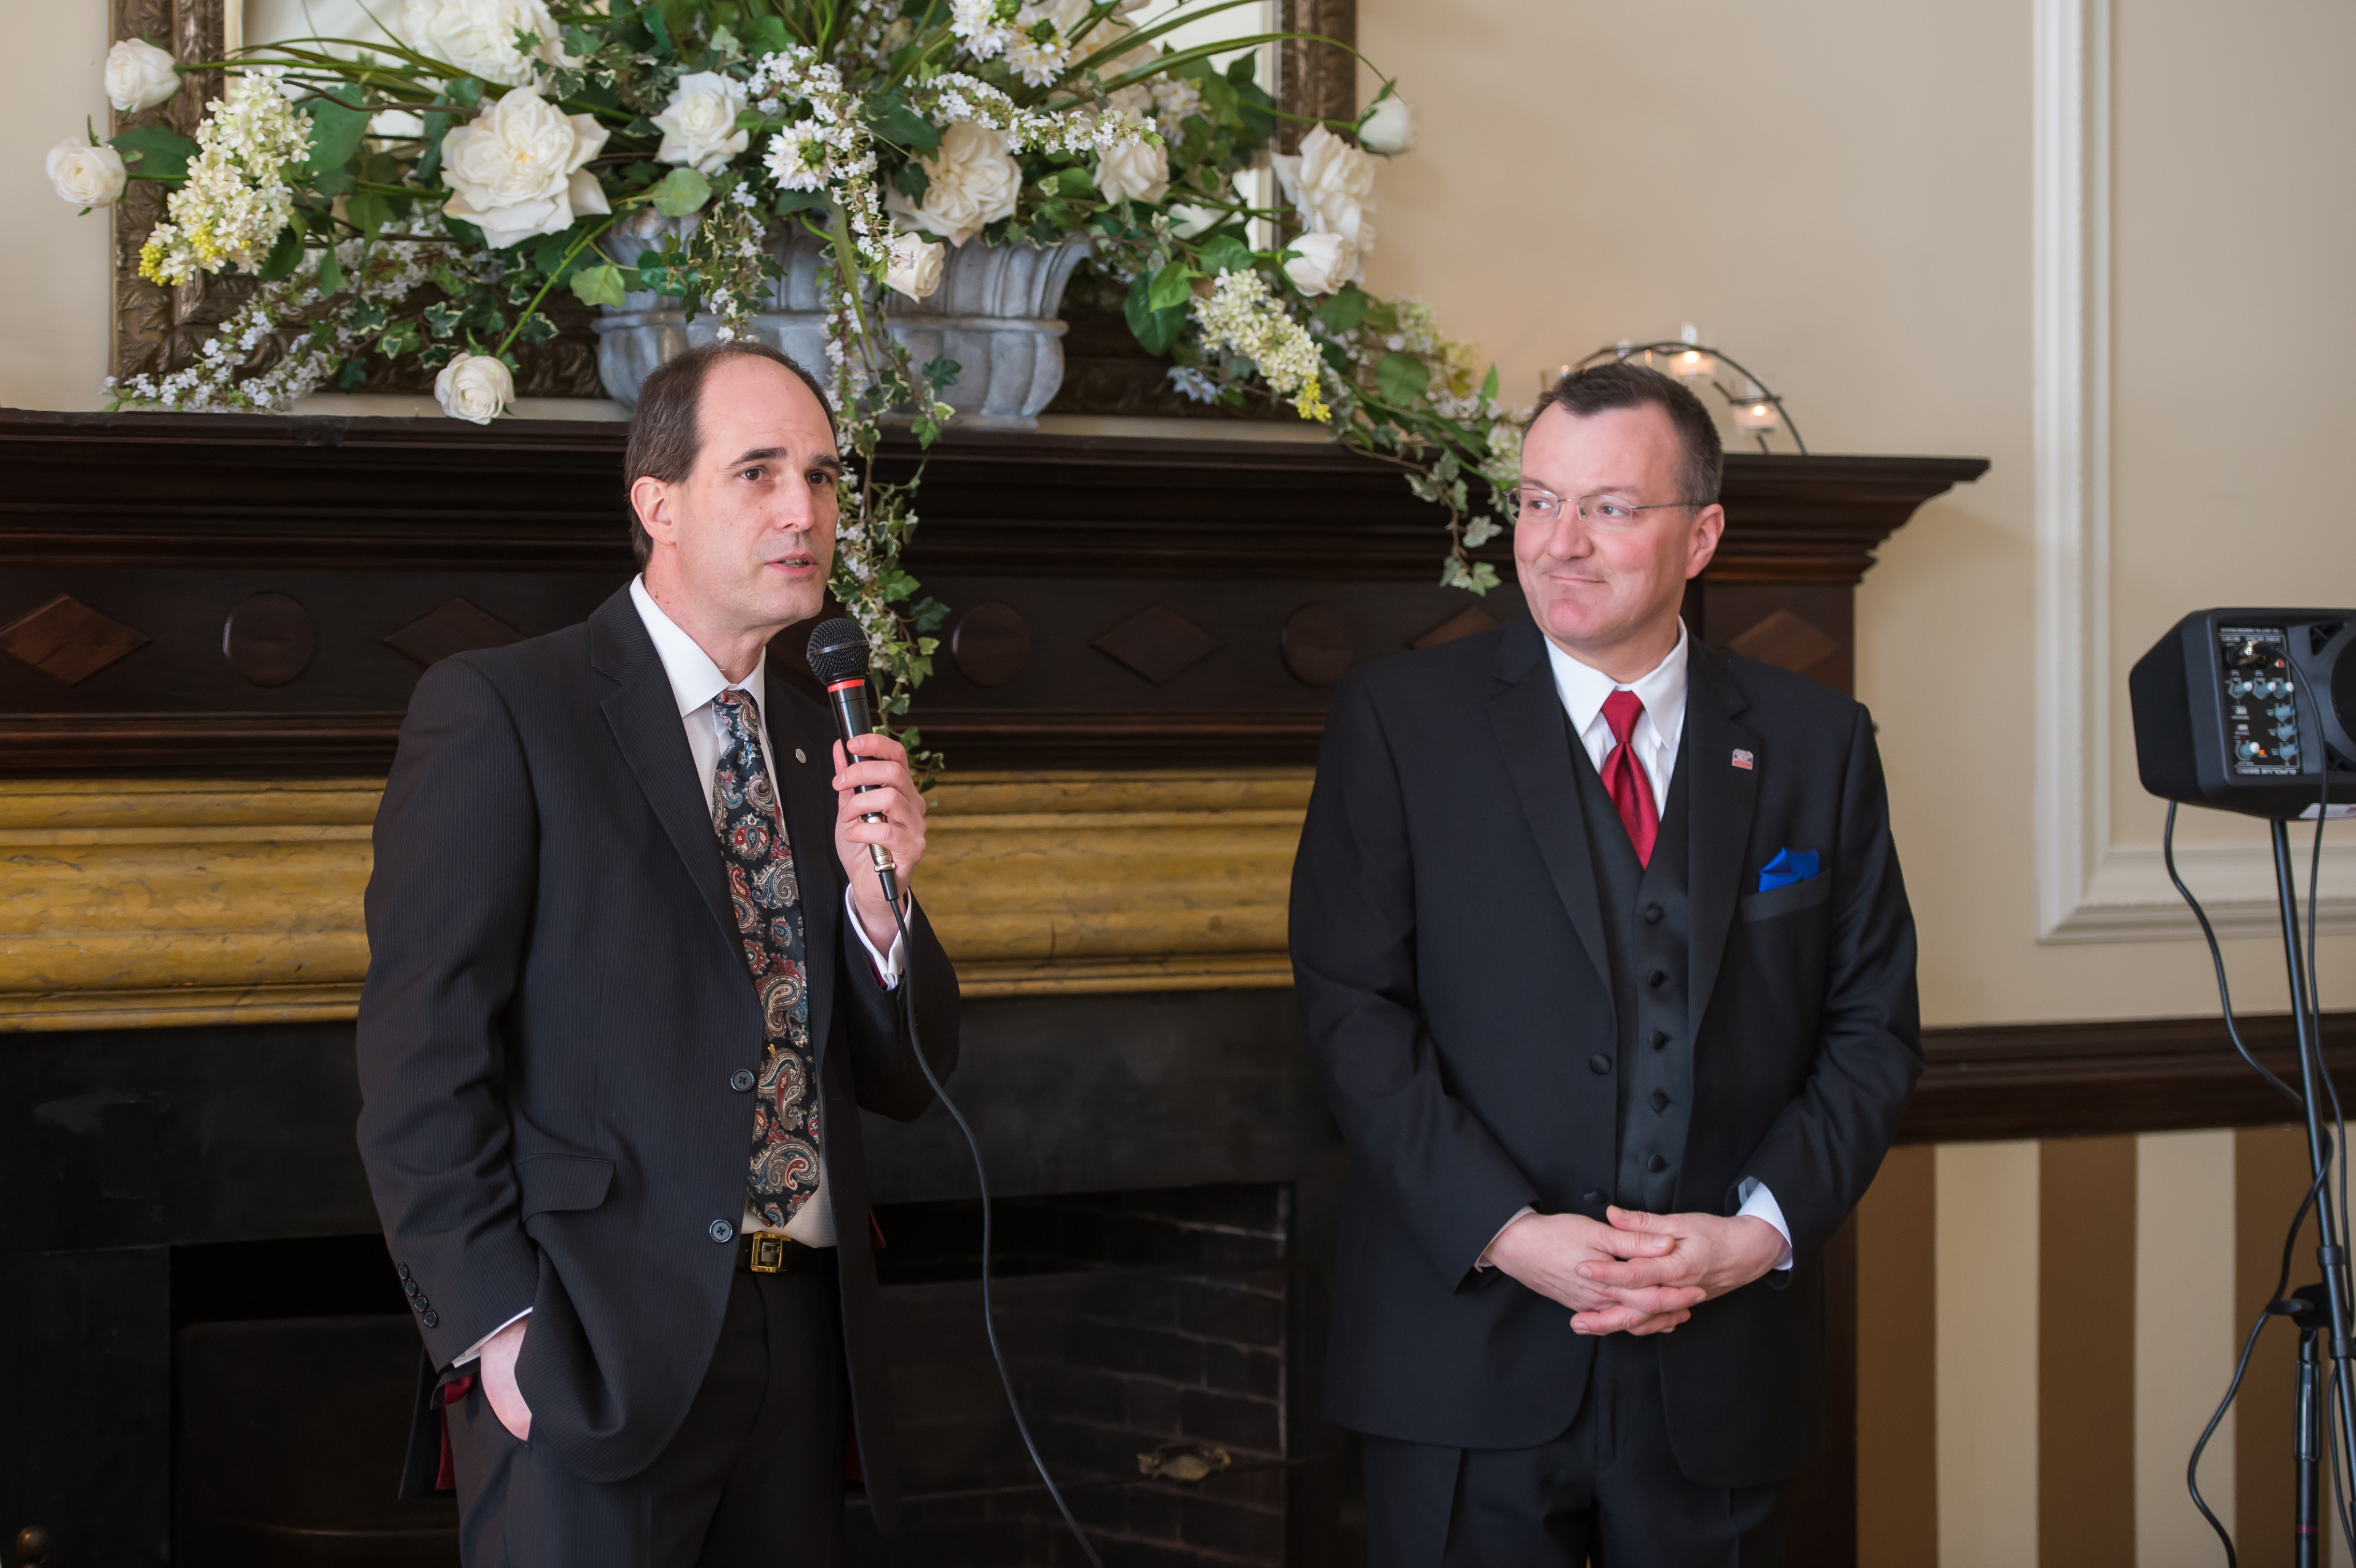 Speech at the 2014 Annual Dinner – Southern Saratoga Chamber